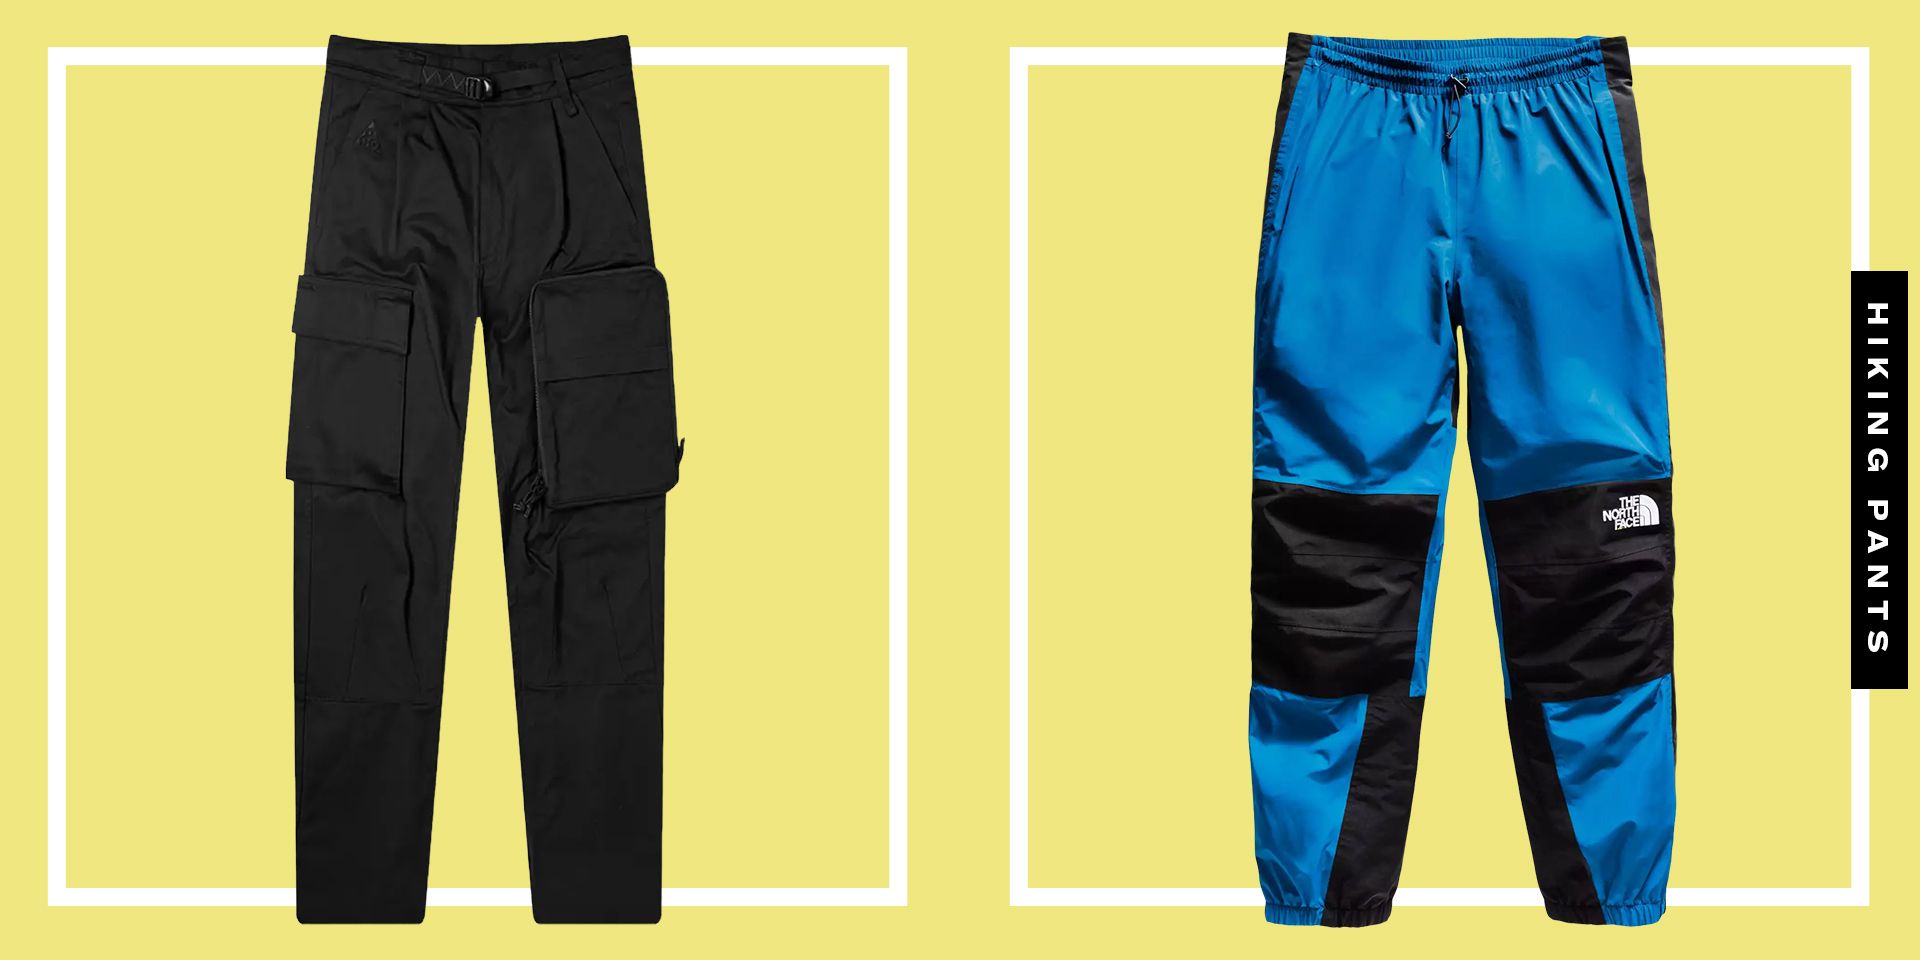 The 9 Best Hiking Pants for Men | Best hiking pants, Hiking outfit men,  Hiking outfit